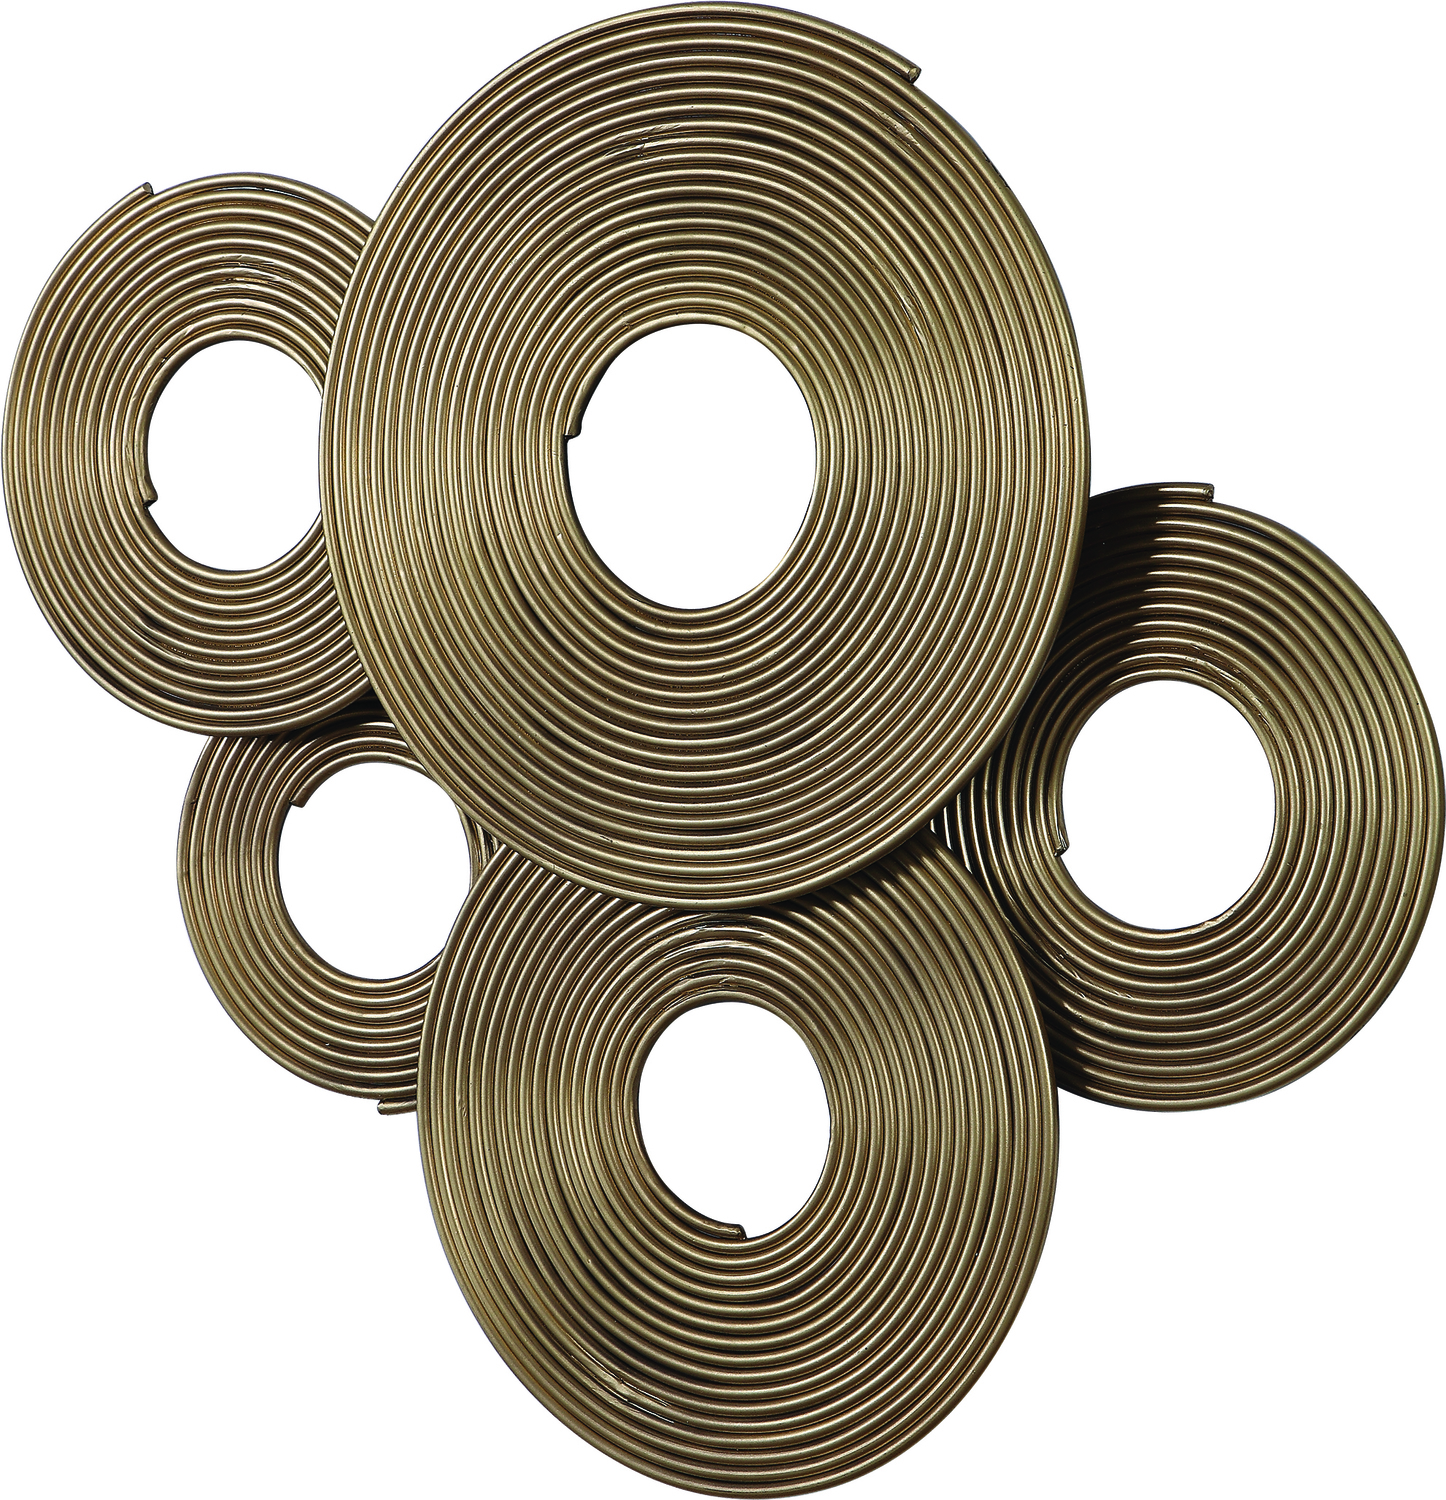 room wall drawing Uttermost Metal Wall Art A 3-dimensional Layering Of Spiraled Iron Rings Featuring A Soft Gold Finish. May Be Hung Three Ways.